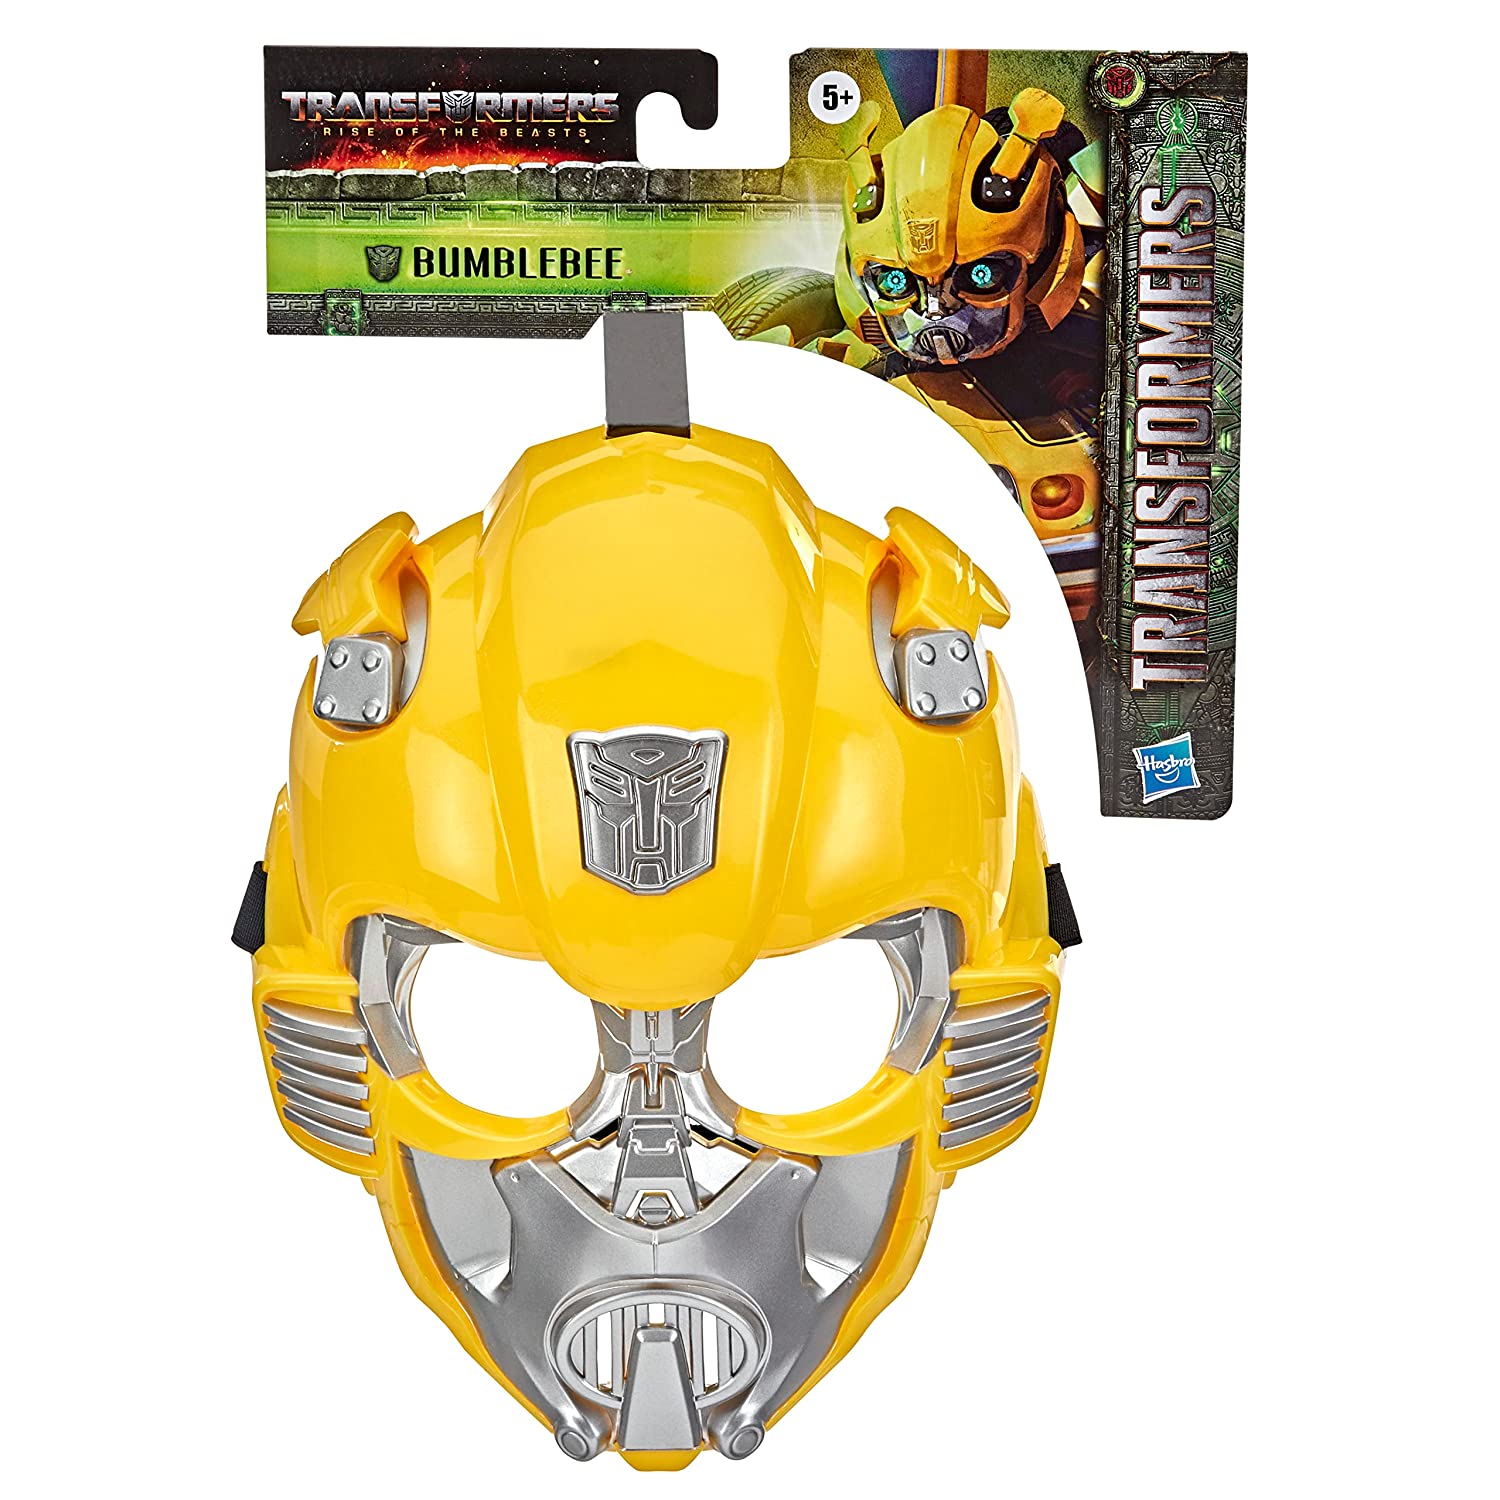 Transformers Rise Of The Beasts Movie 10 Inch Bumblebee Mask For Ages 5 Years And Up | Hasbro
| Sams toy - samstoy.in